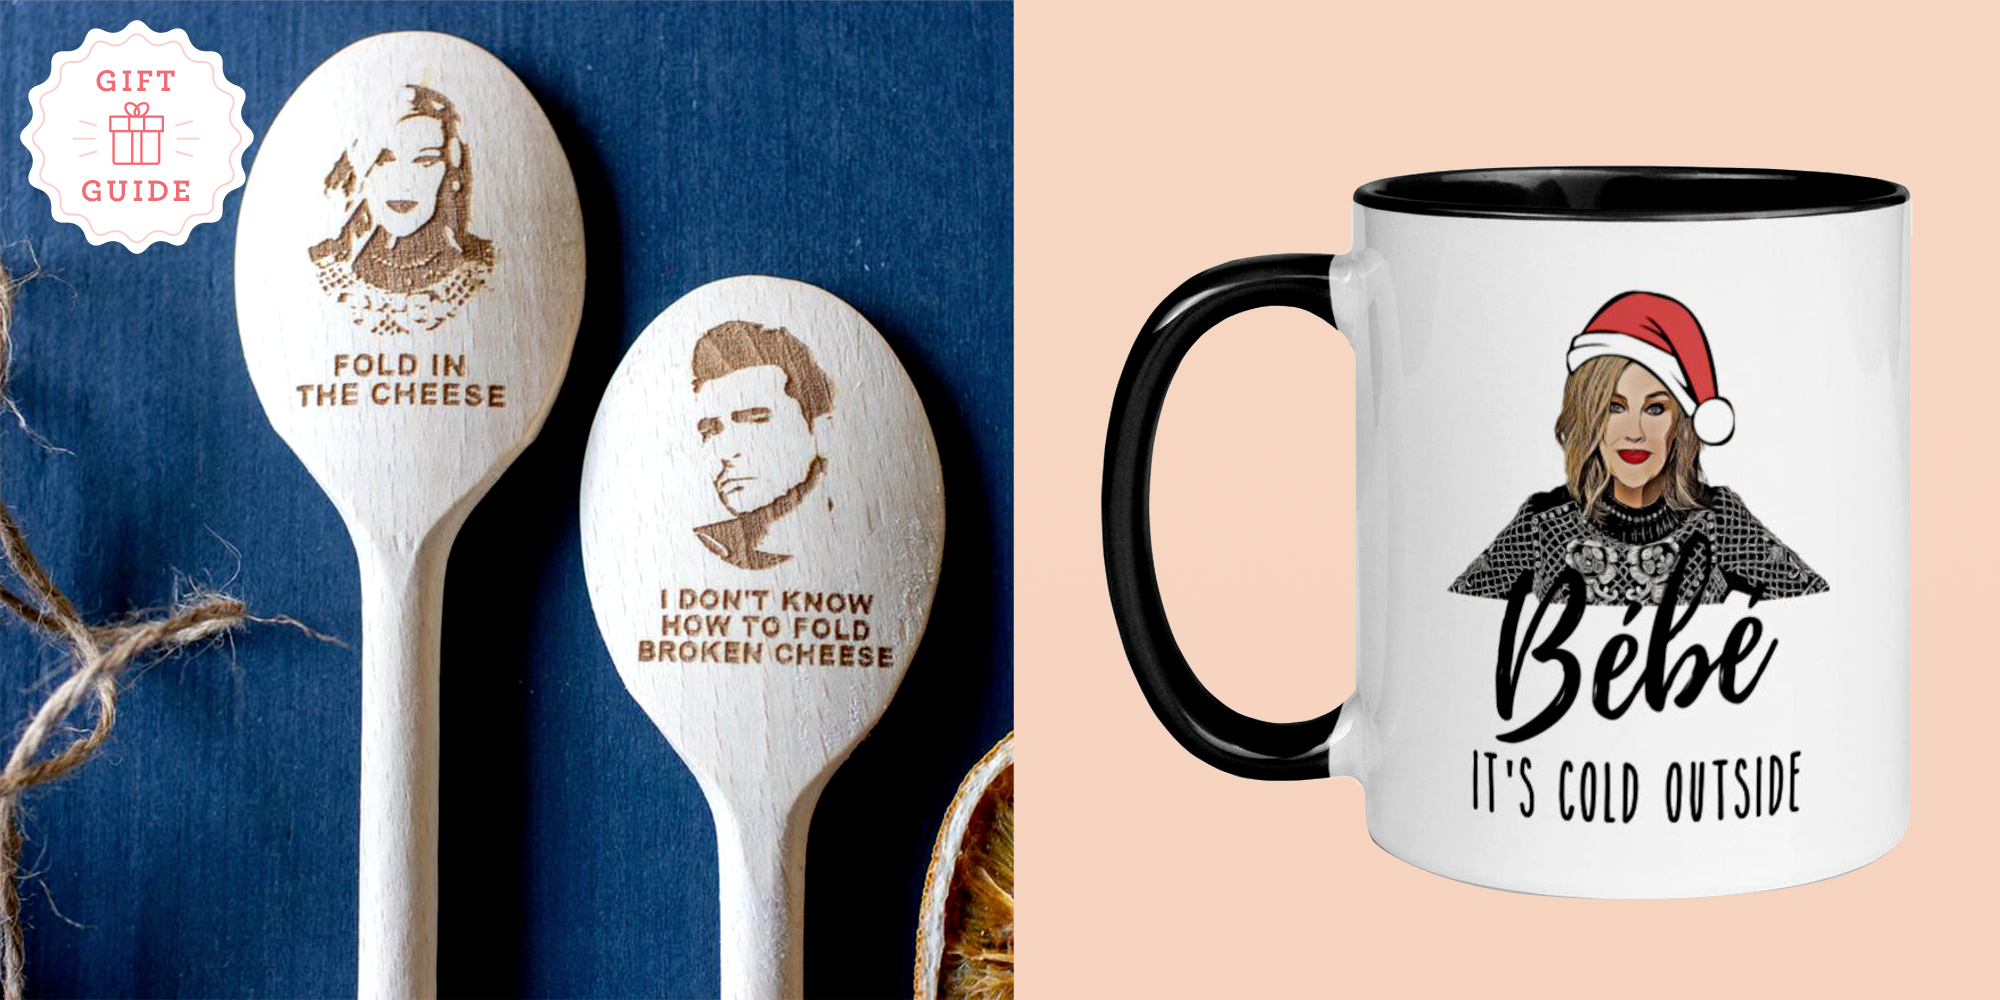 30 Best 'Schitt's Creek' Gifts for Fans 2022 - 'Schitts Creek' Gift Ideas,  Products, and Merchandise